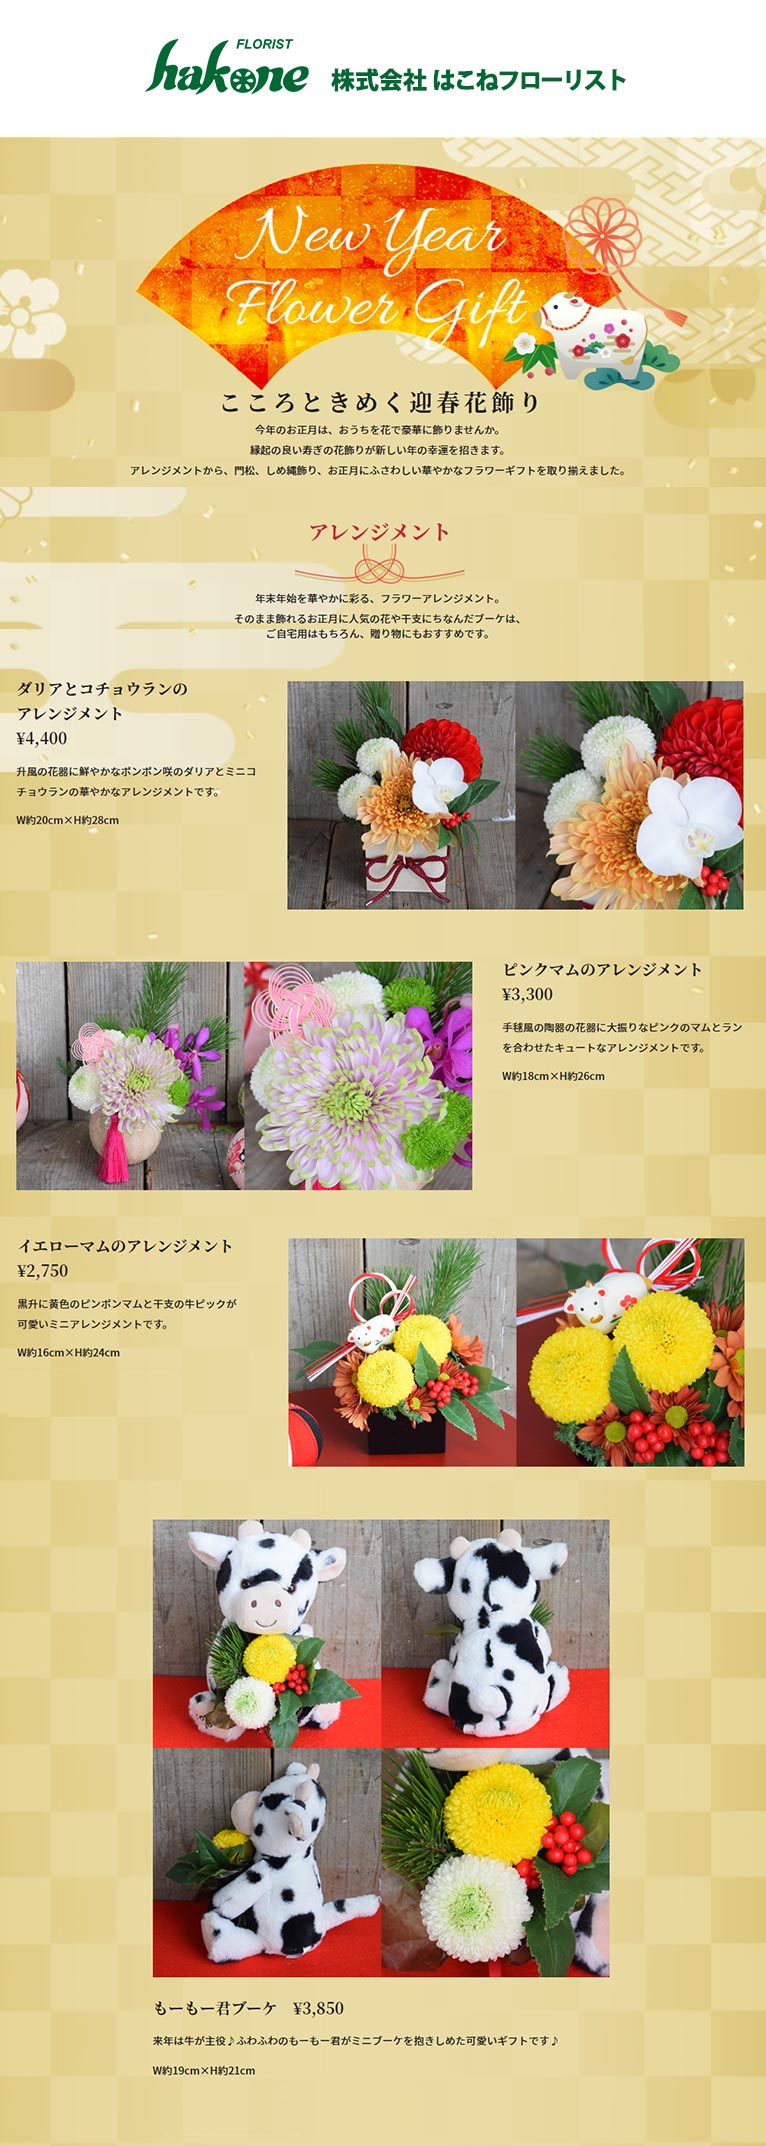 2021New Year Flower Gift はこねフローリスト